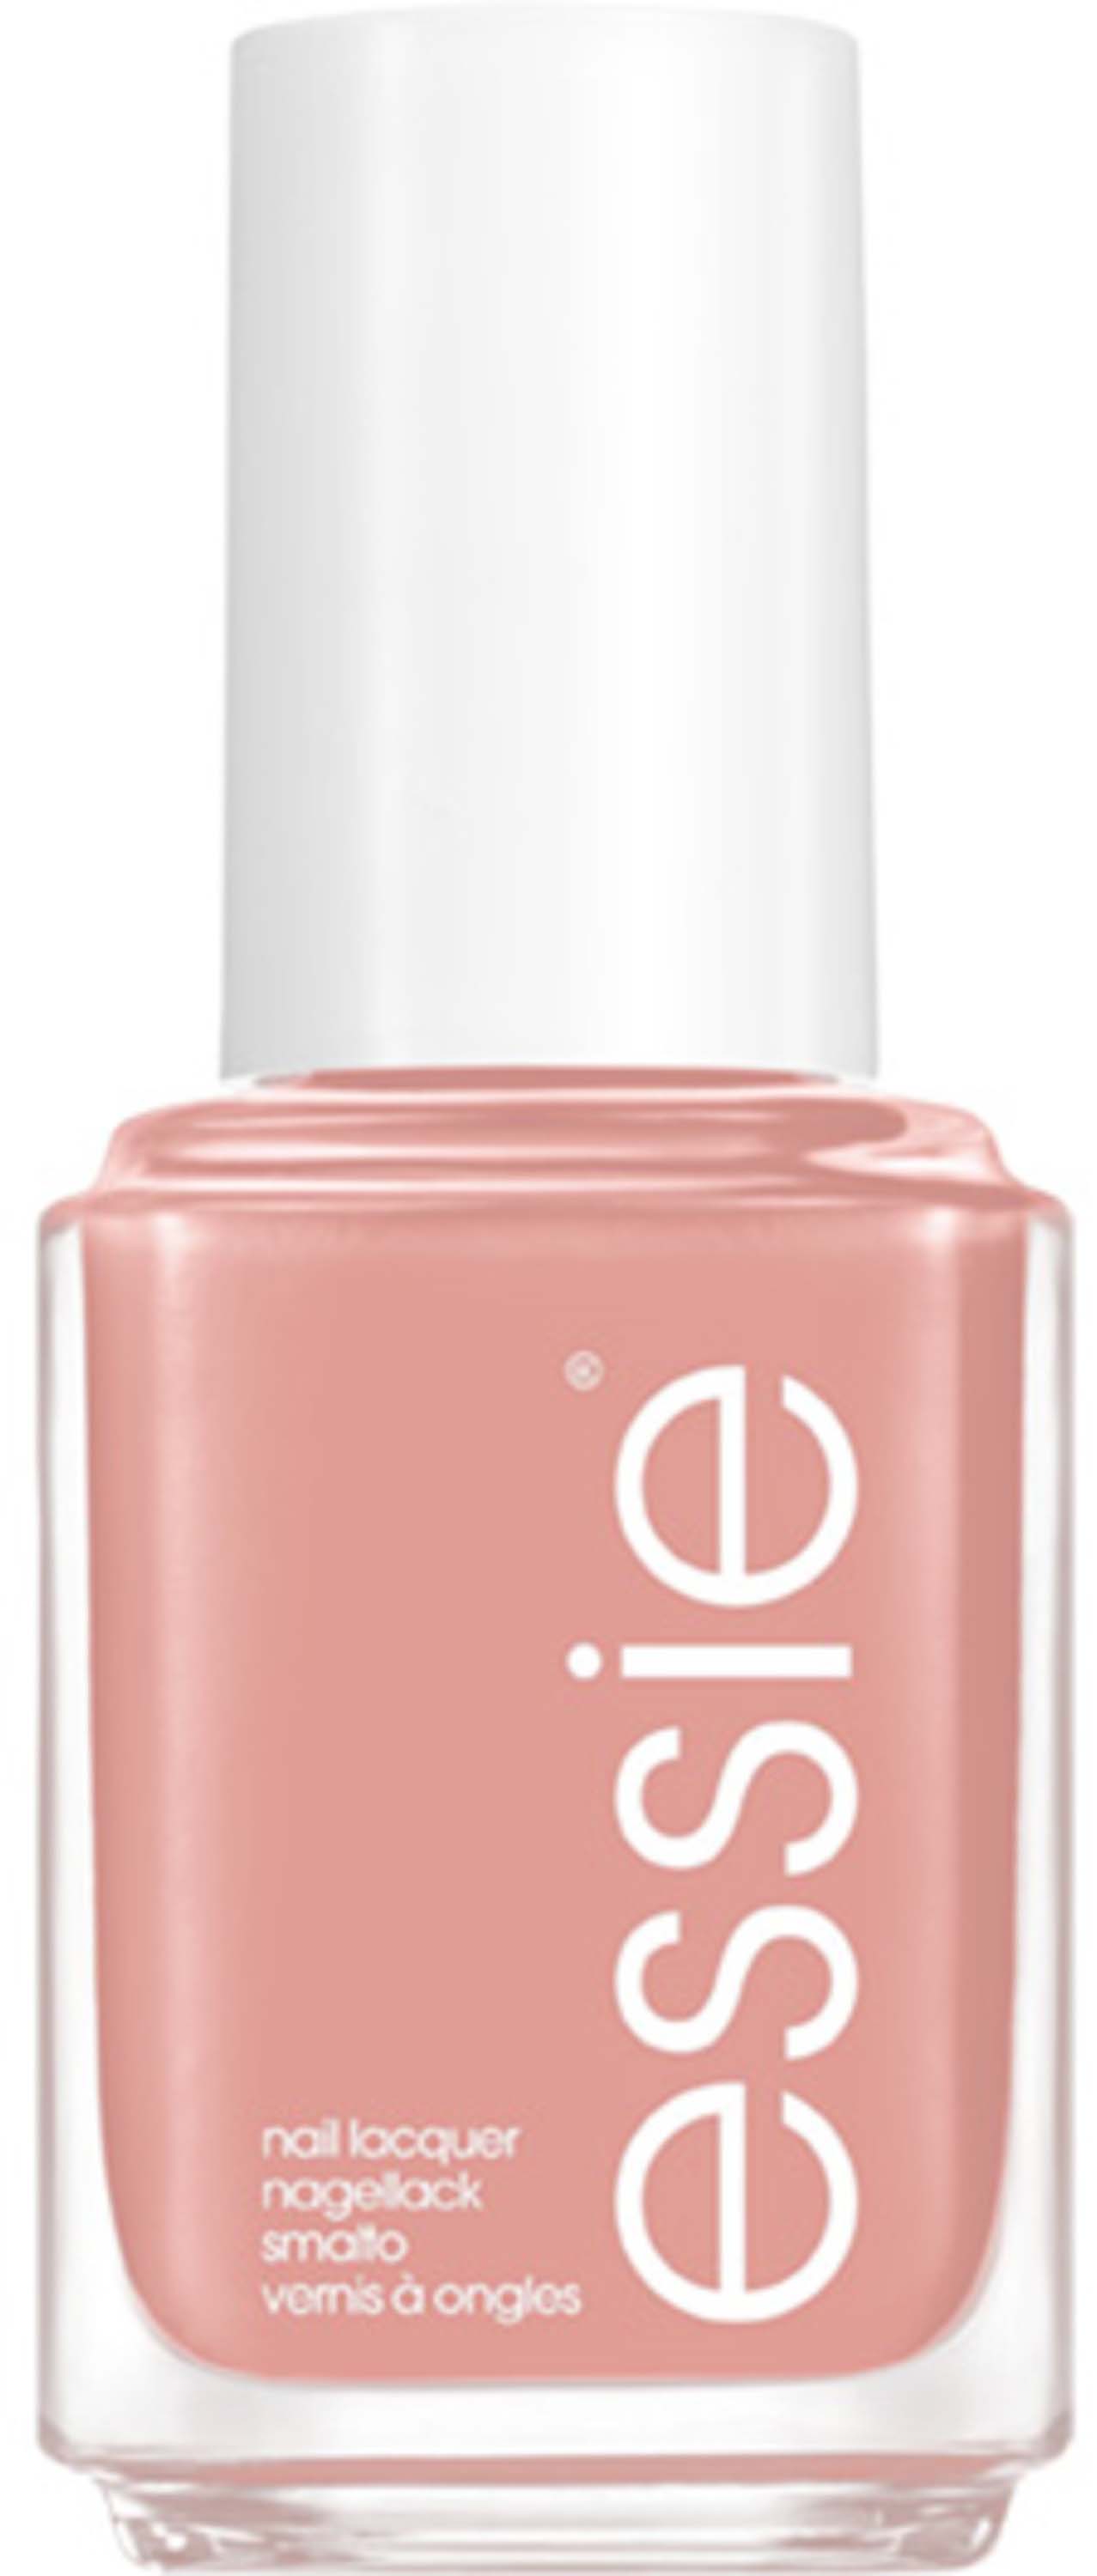 Essie not red-y for Nail collection bed 749 Snuggle The Real Is Lacquer